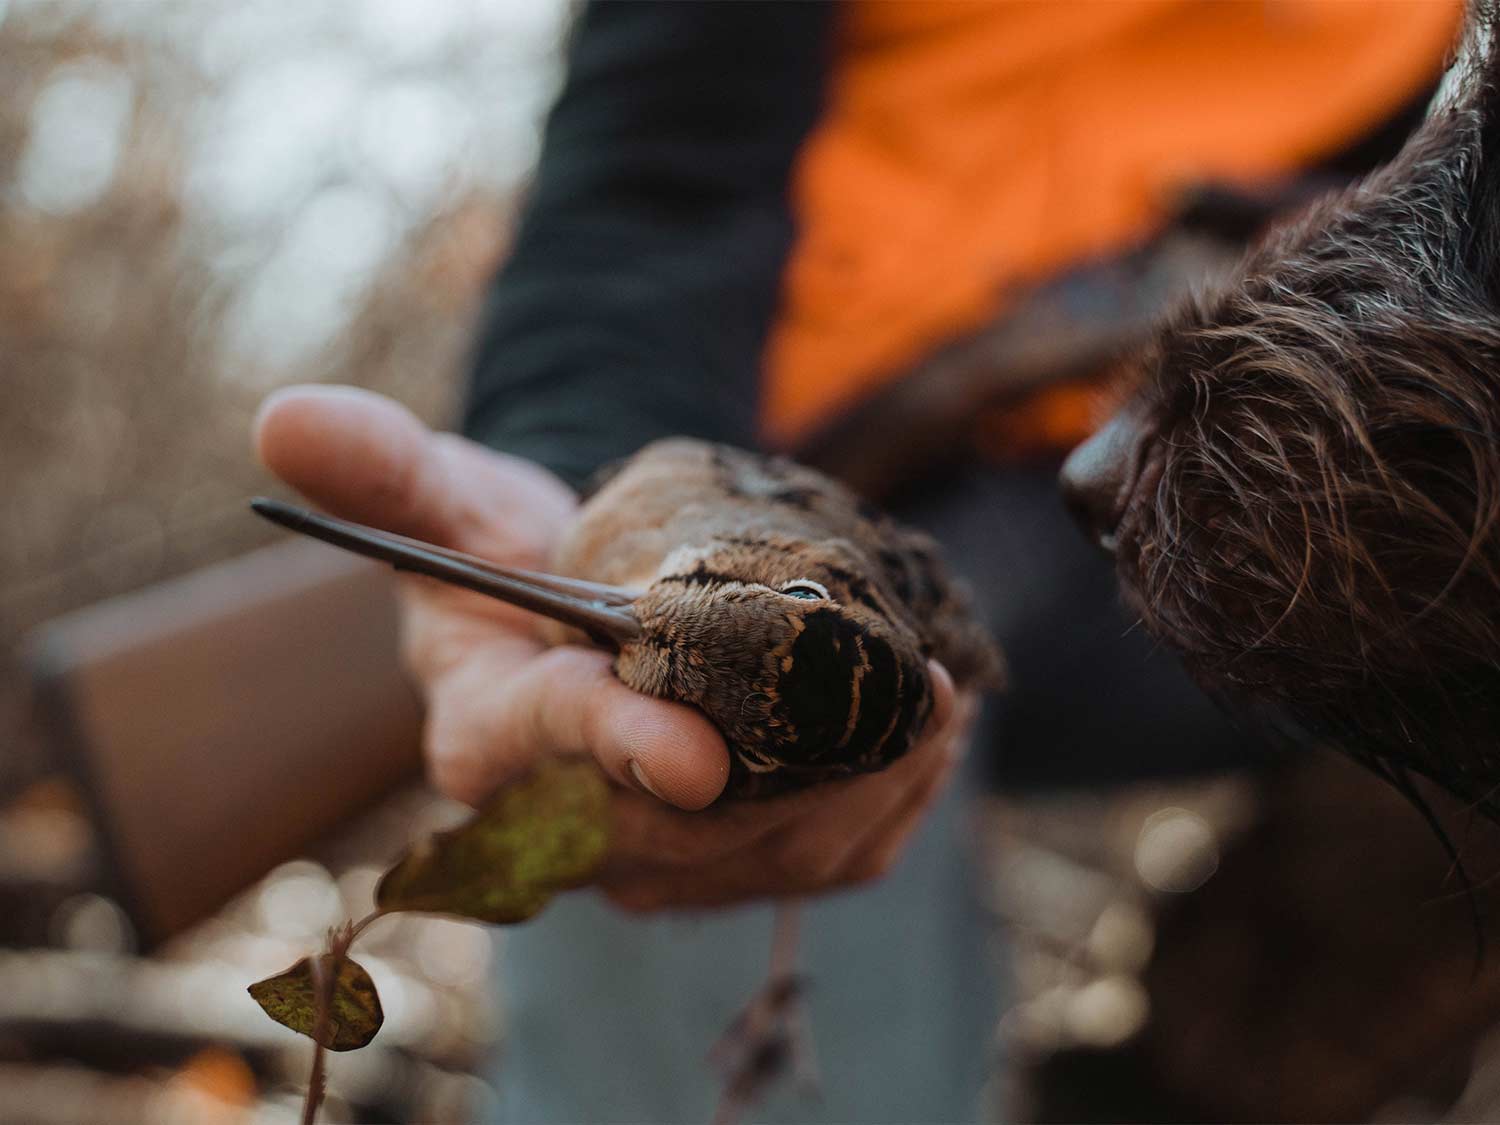 A small woodcock bird in the hand of a hunter.